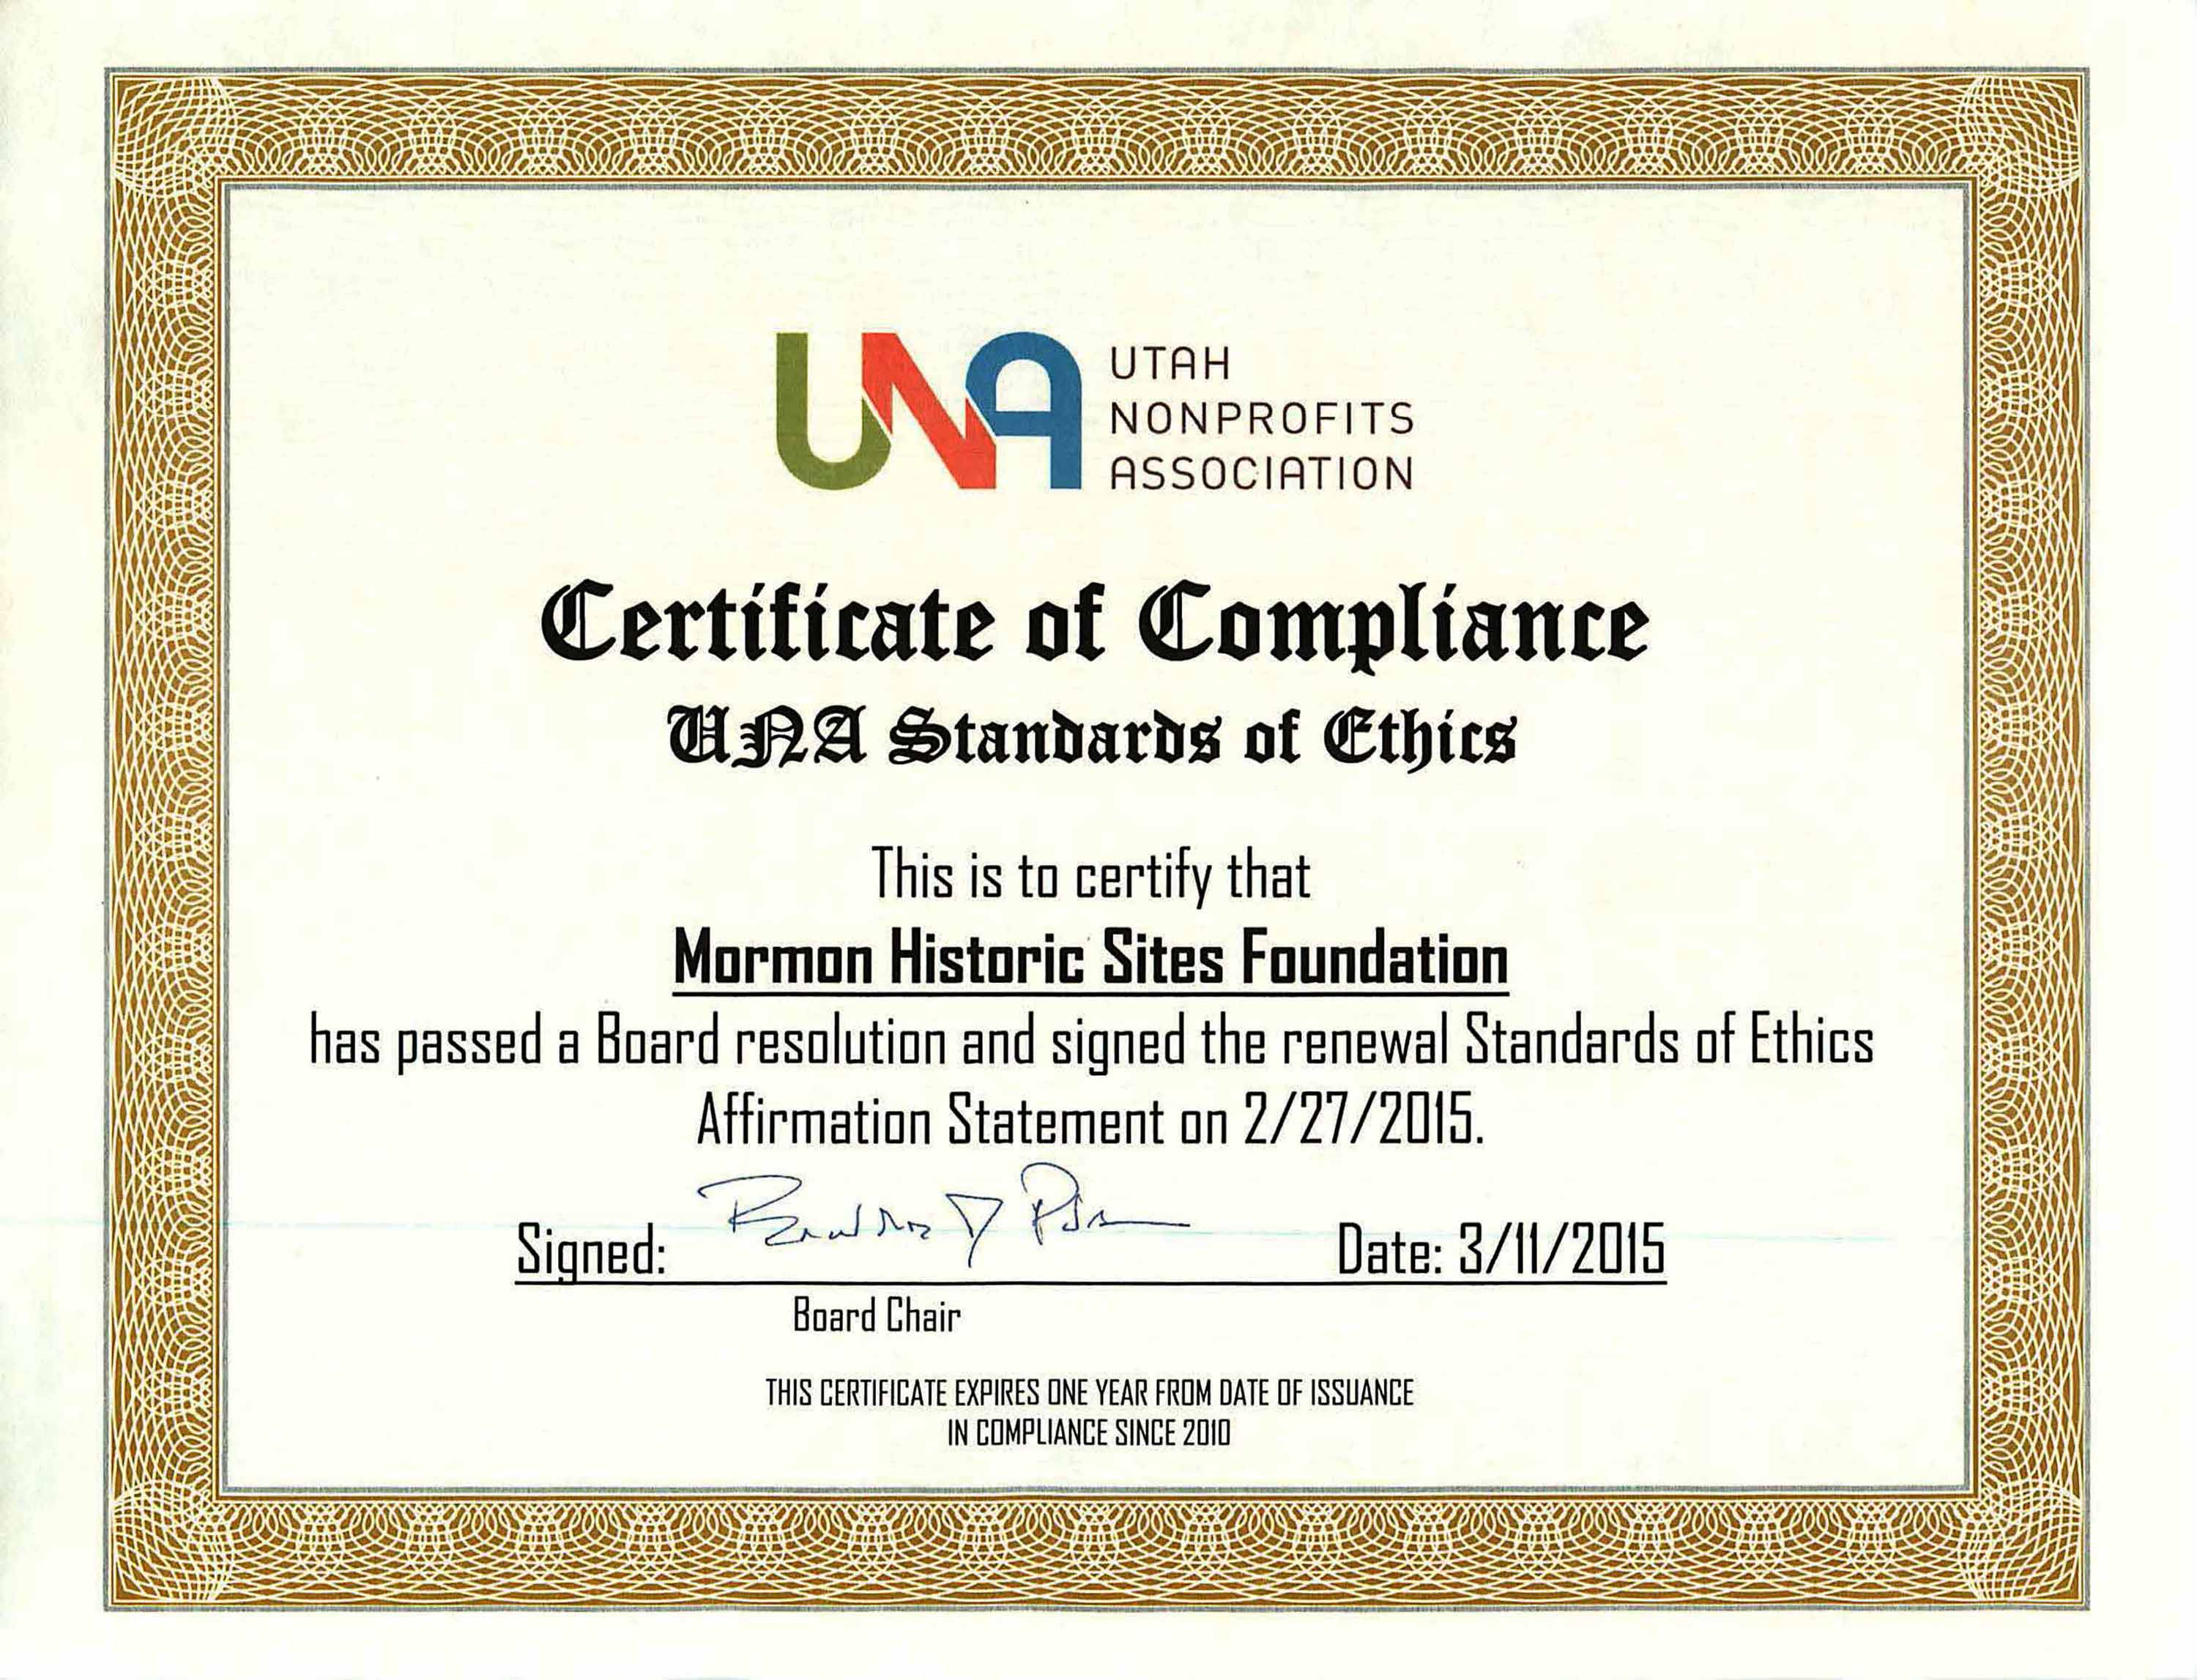 Certificate of compliance